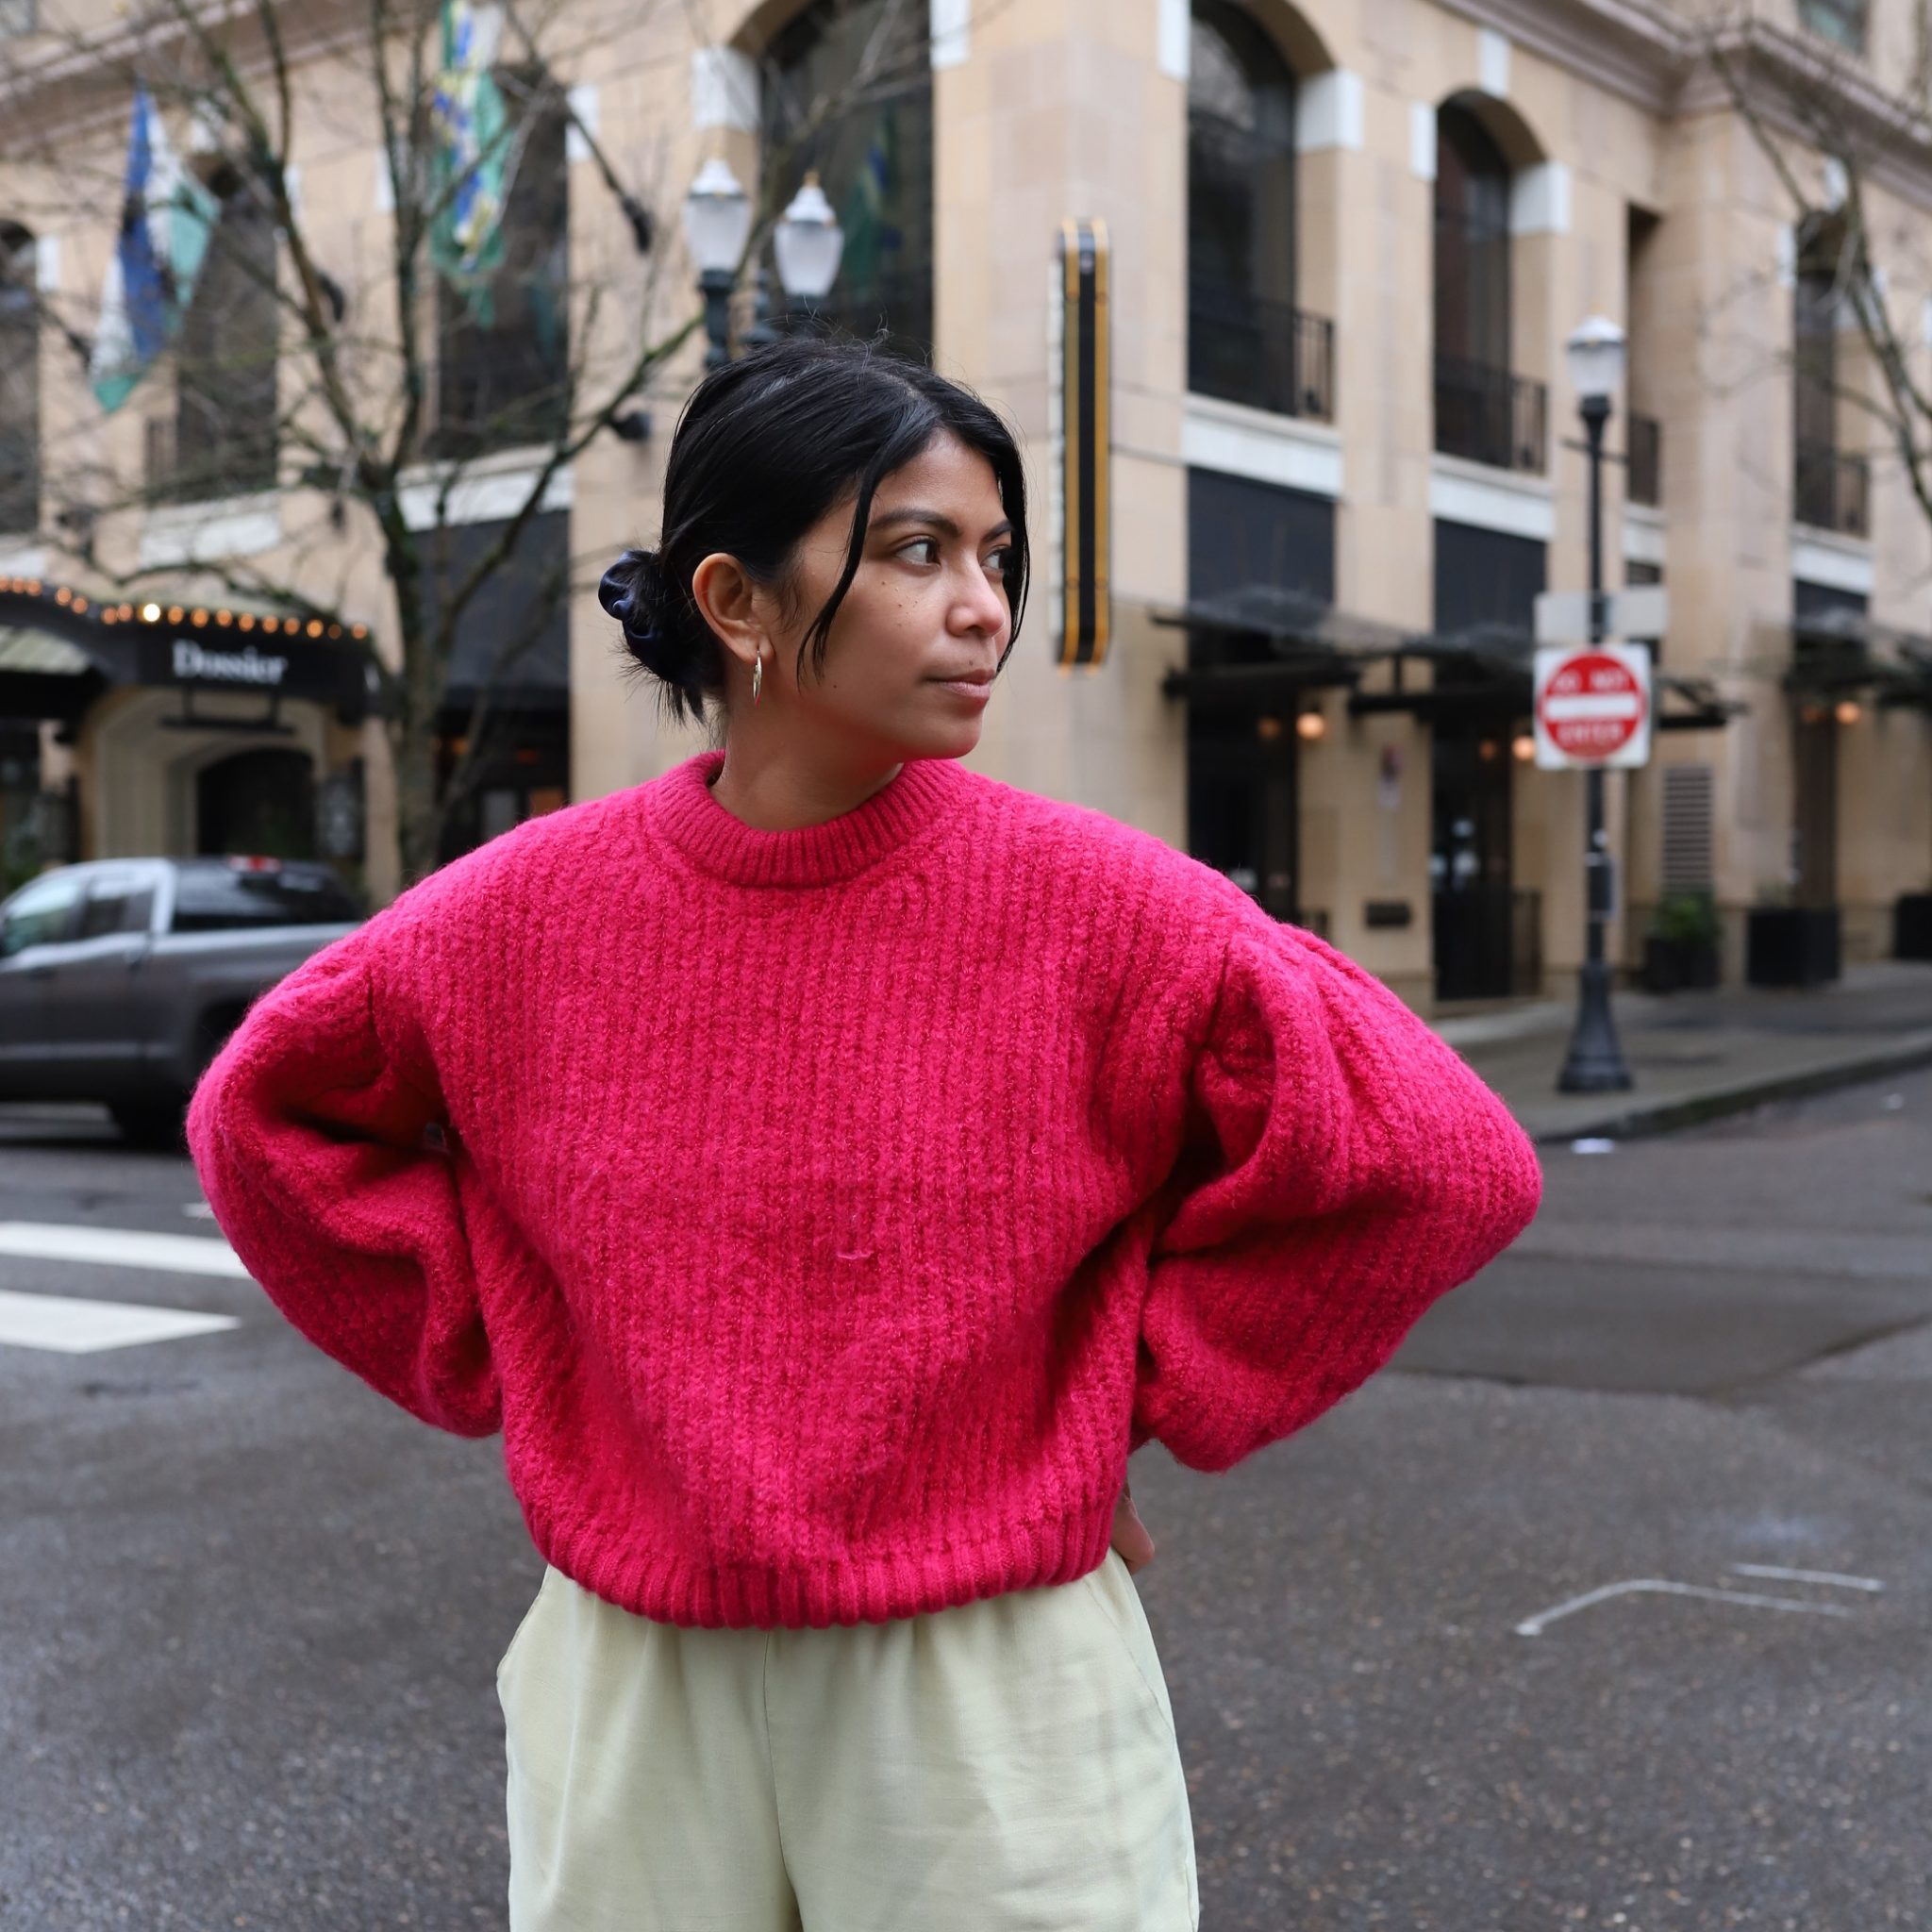 How to wear bright colors in the winter. - The P. Town Girls